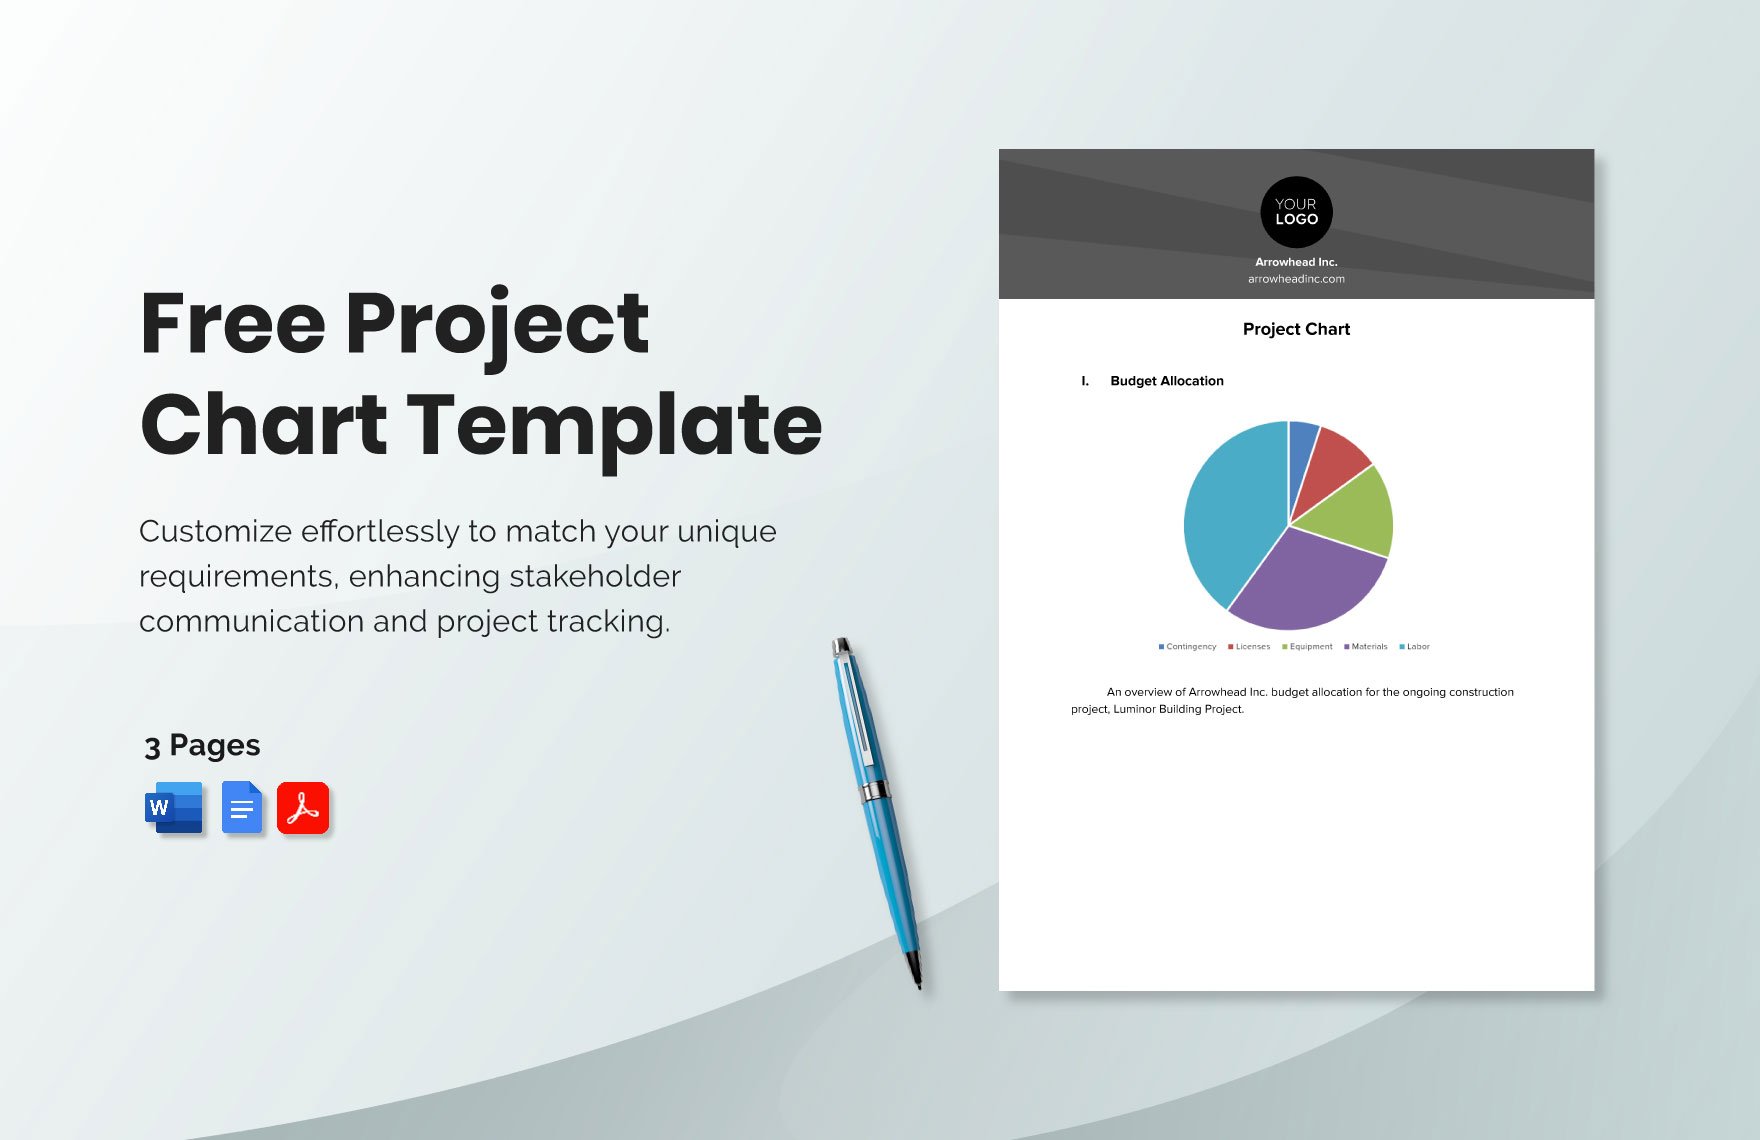 Free Project Chart Template in Word, Google Docs, PDF